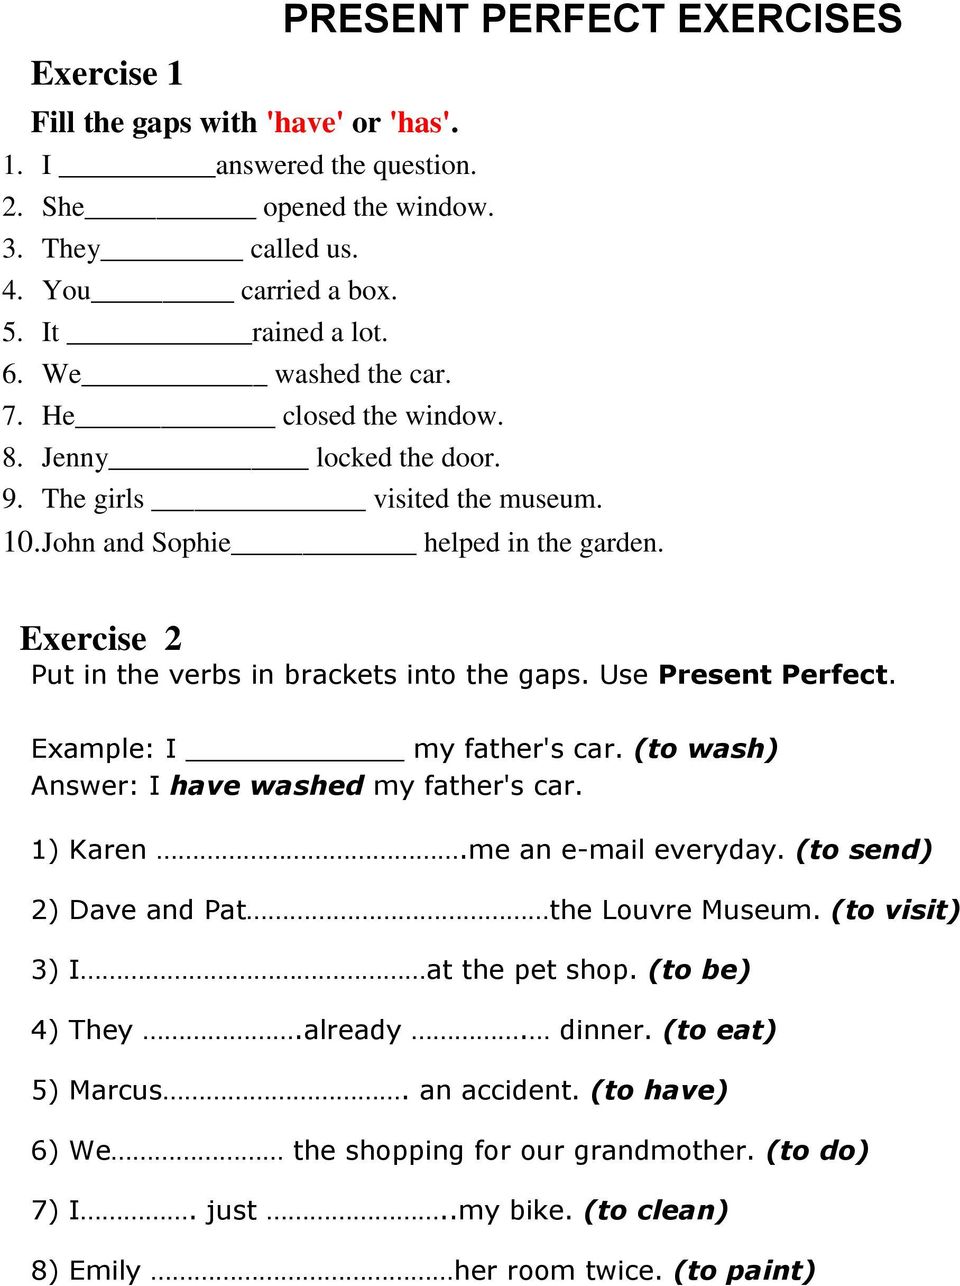 Present perfect упражнения have has. Present perfect negative упражнения. Present perfect упражнения 6 класс Worksheets. Present perfect simple Elementary. Упражнение 5 класс present perfect have has.